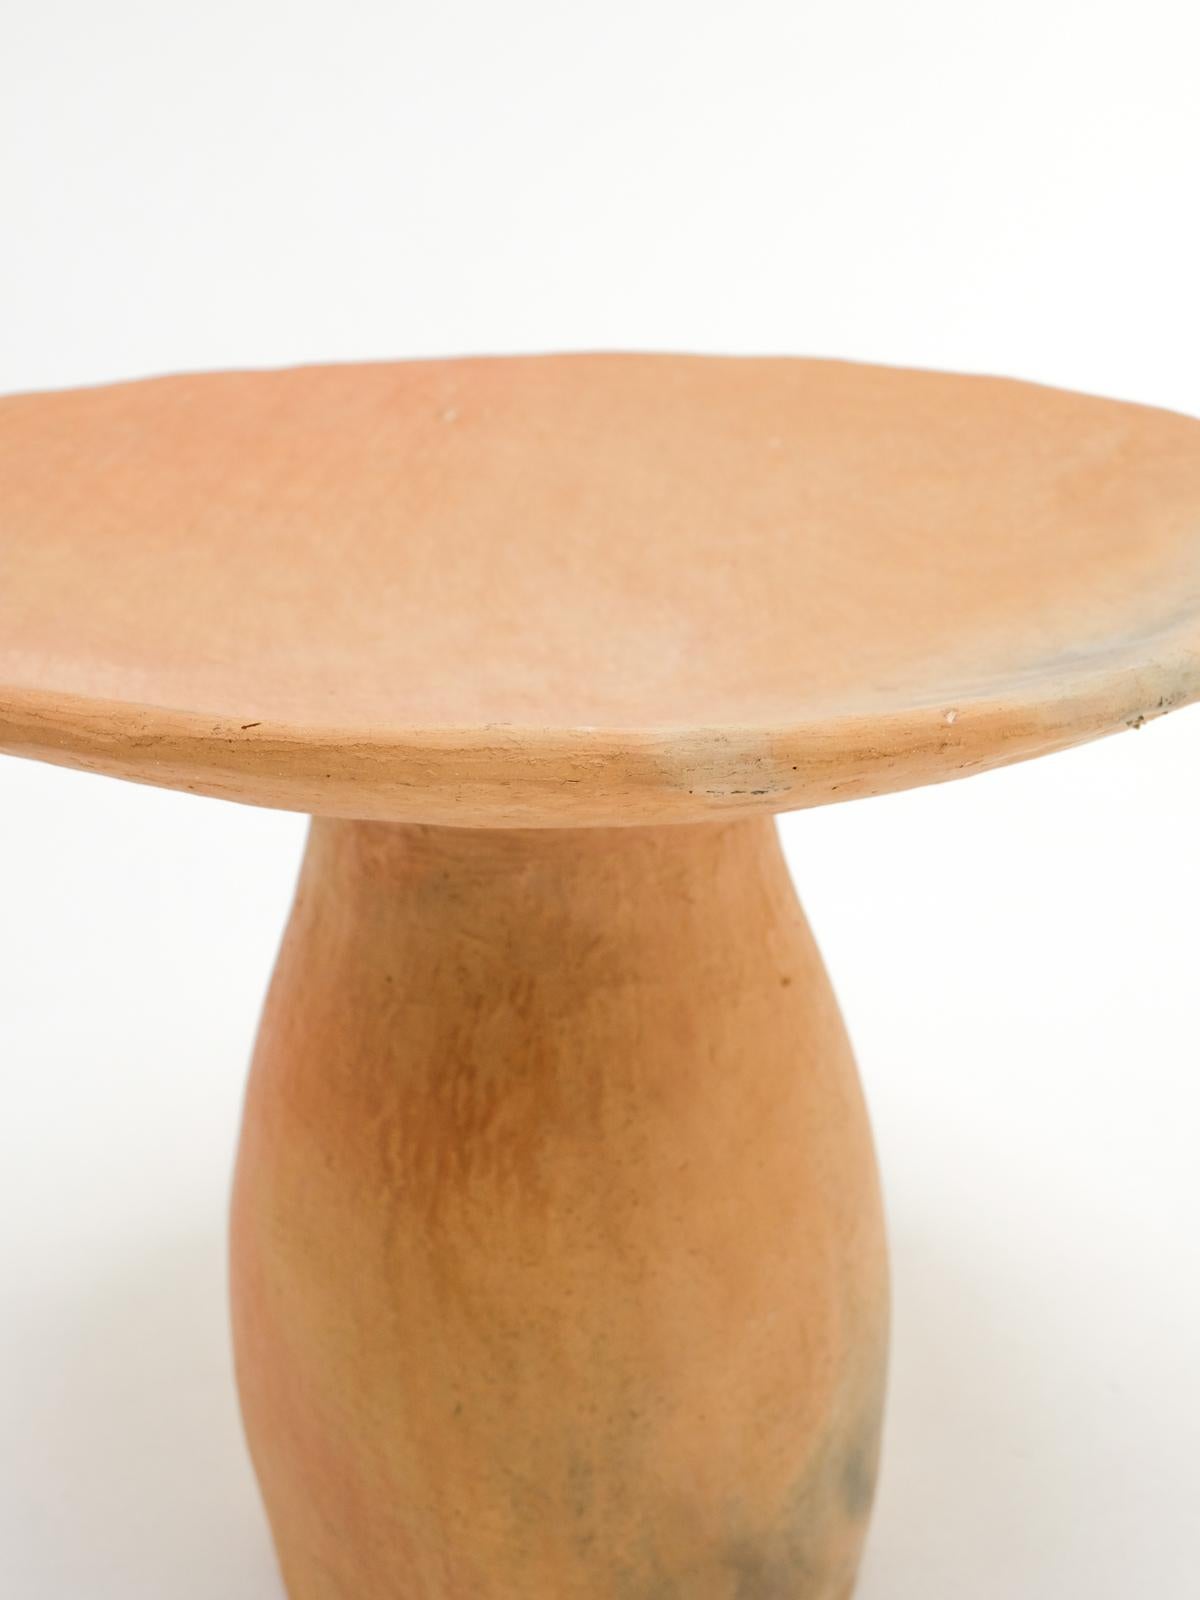 Terracotta contemporary Side Tables Made of local Clay, Handbuilt handfired For Sale 9